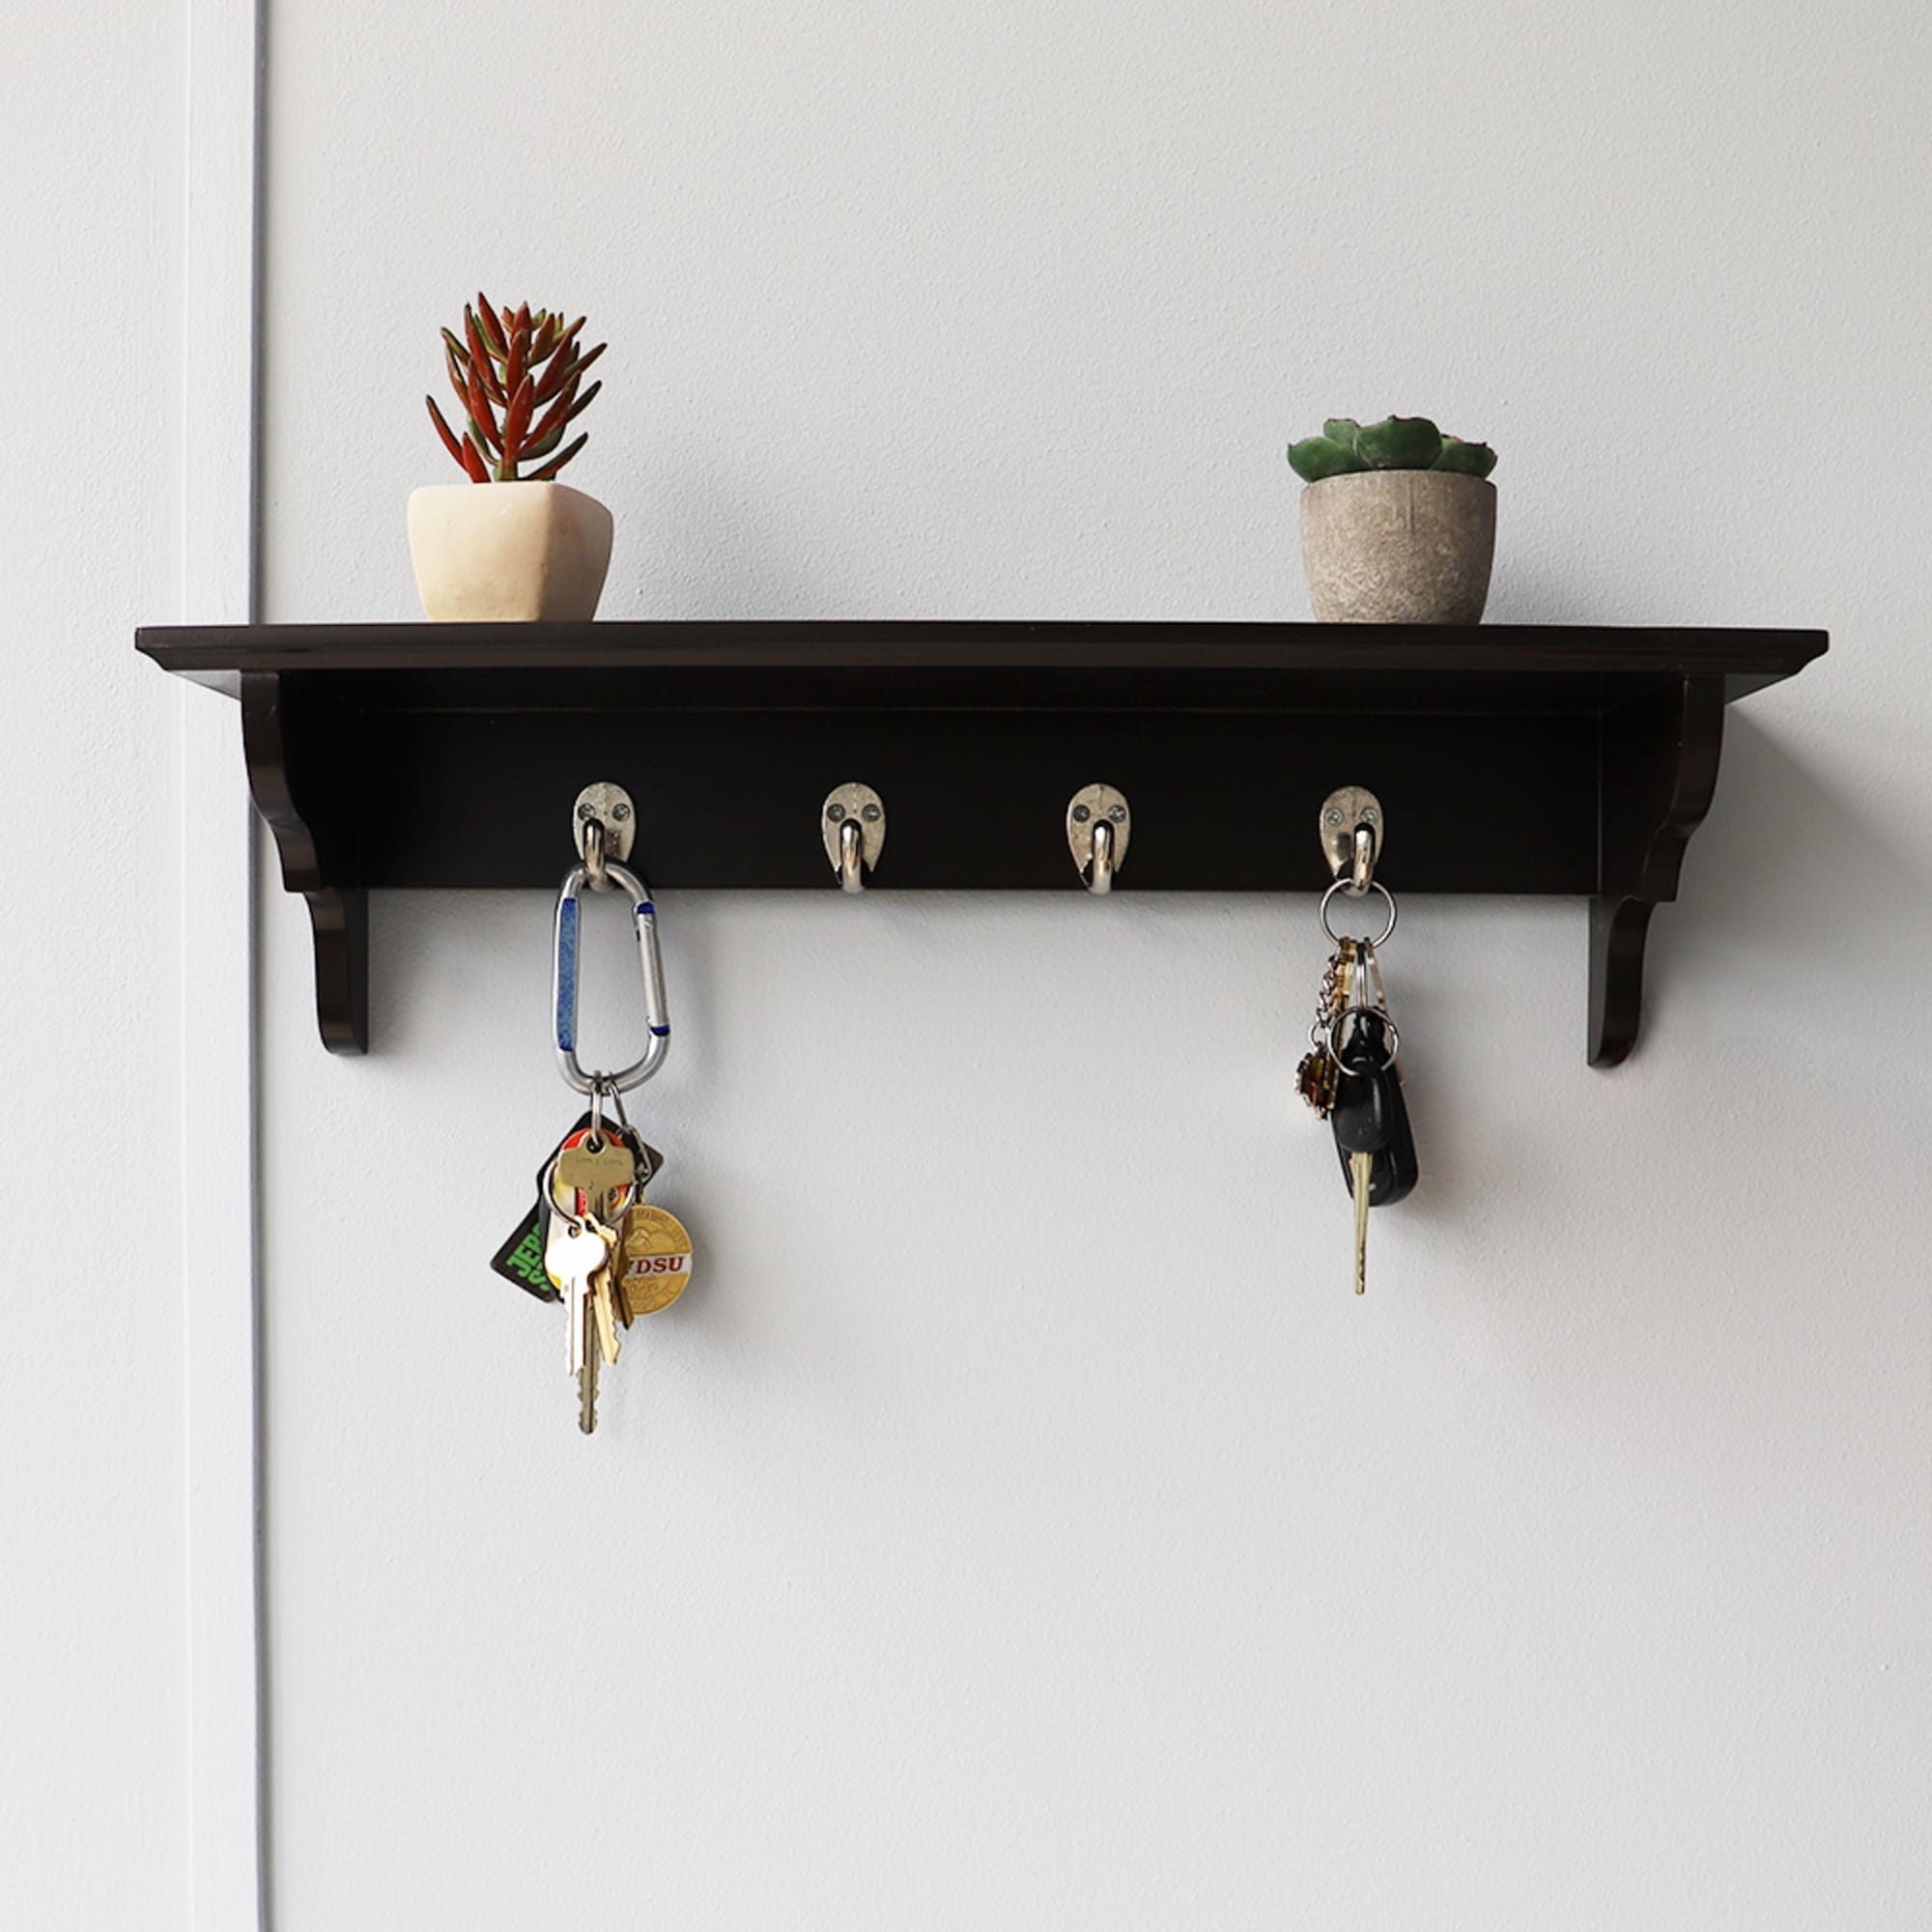 Home Basics Wood Floating Shelf with Key Hooks, Brown $10.00 EACH, CASE PACK OF 6